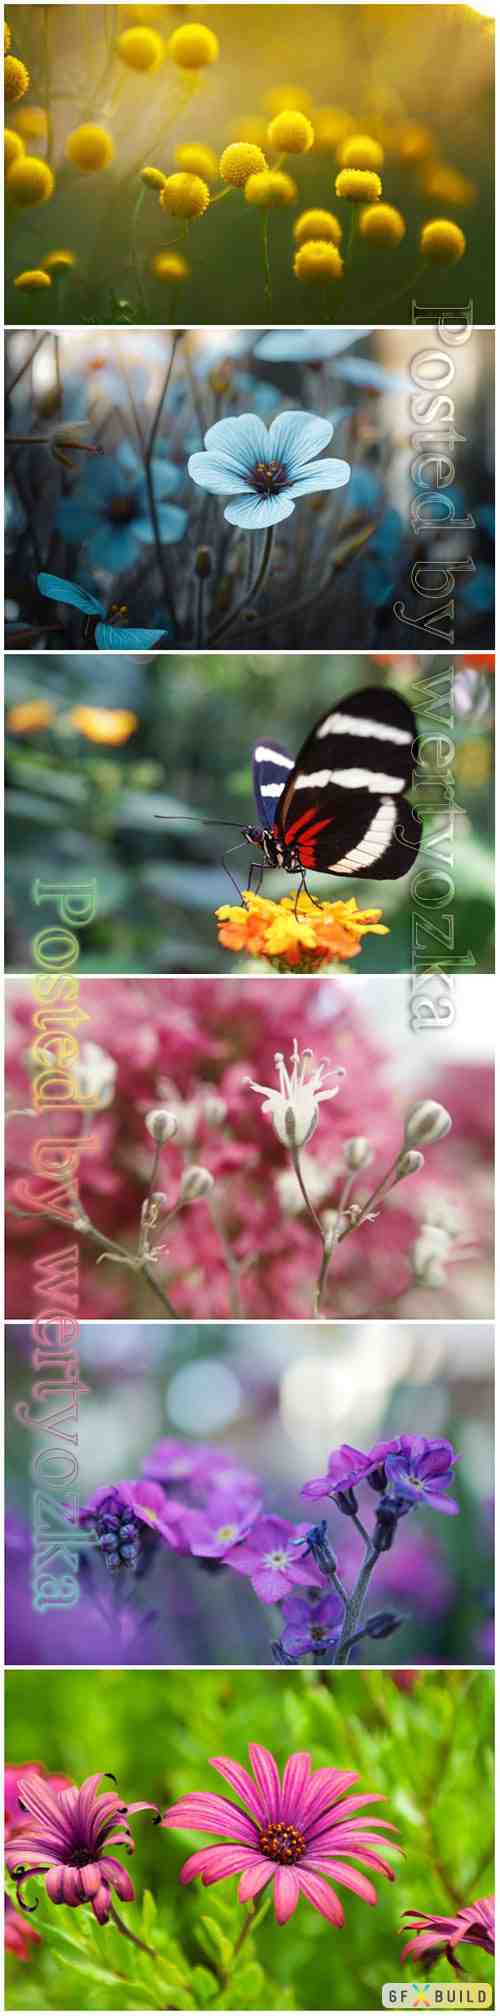 Flowers and butterflies beautiful stock photo